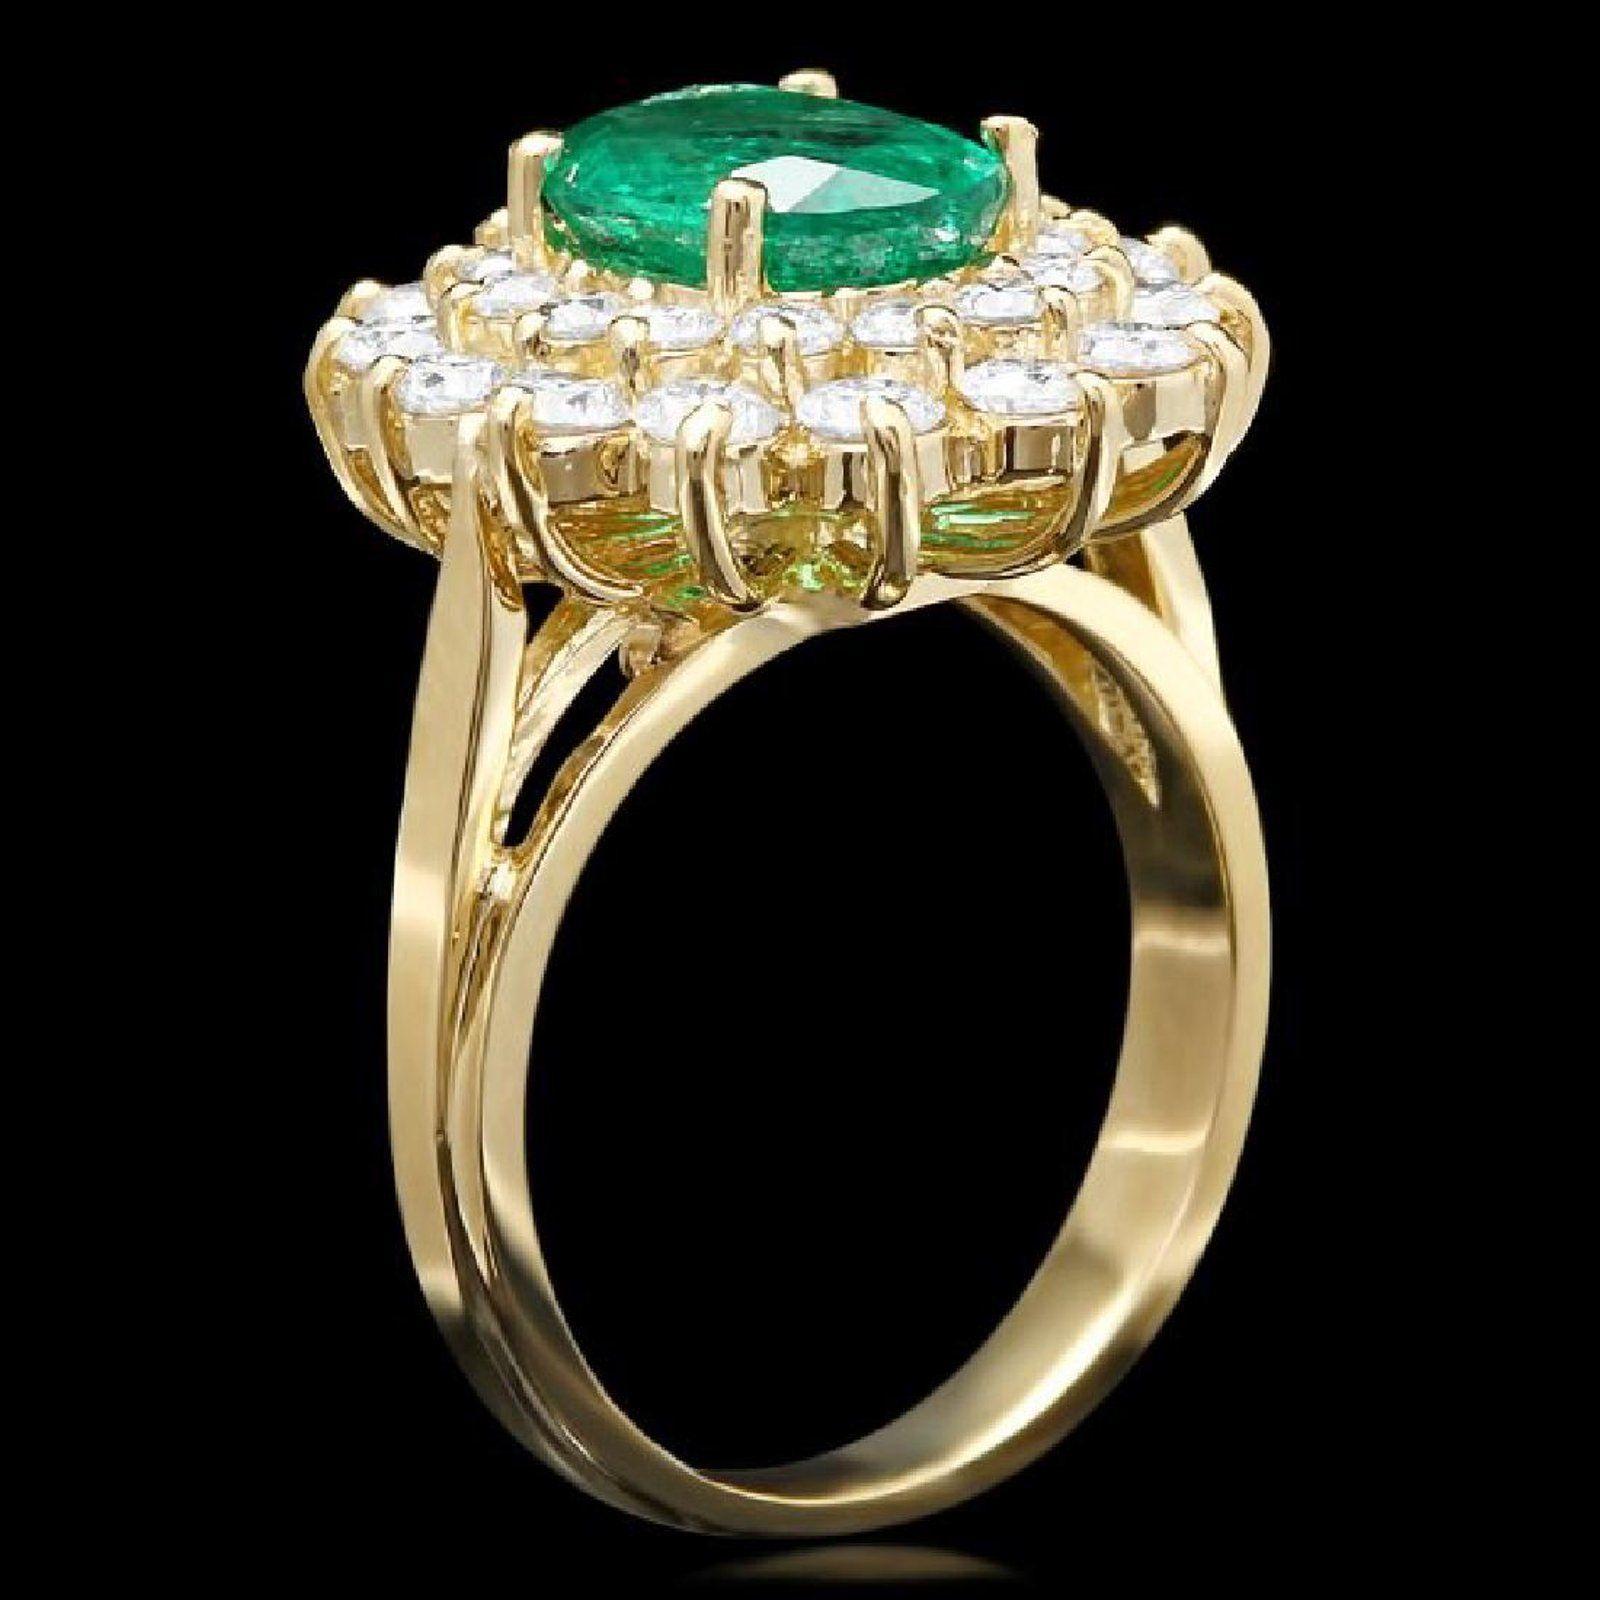 3.50 Carats Natural Emerald and Diamond 14K Solid Yellow Gold Ring

Total Natural Green Emerald Weight is: Approx. 2.00 Carats (transparent) (Oil Treated)

Emerald Measures: Approx. 9.00 x 7.00mm

Natural Round Diamonds Weight: Approx. 1.50 Carats